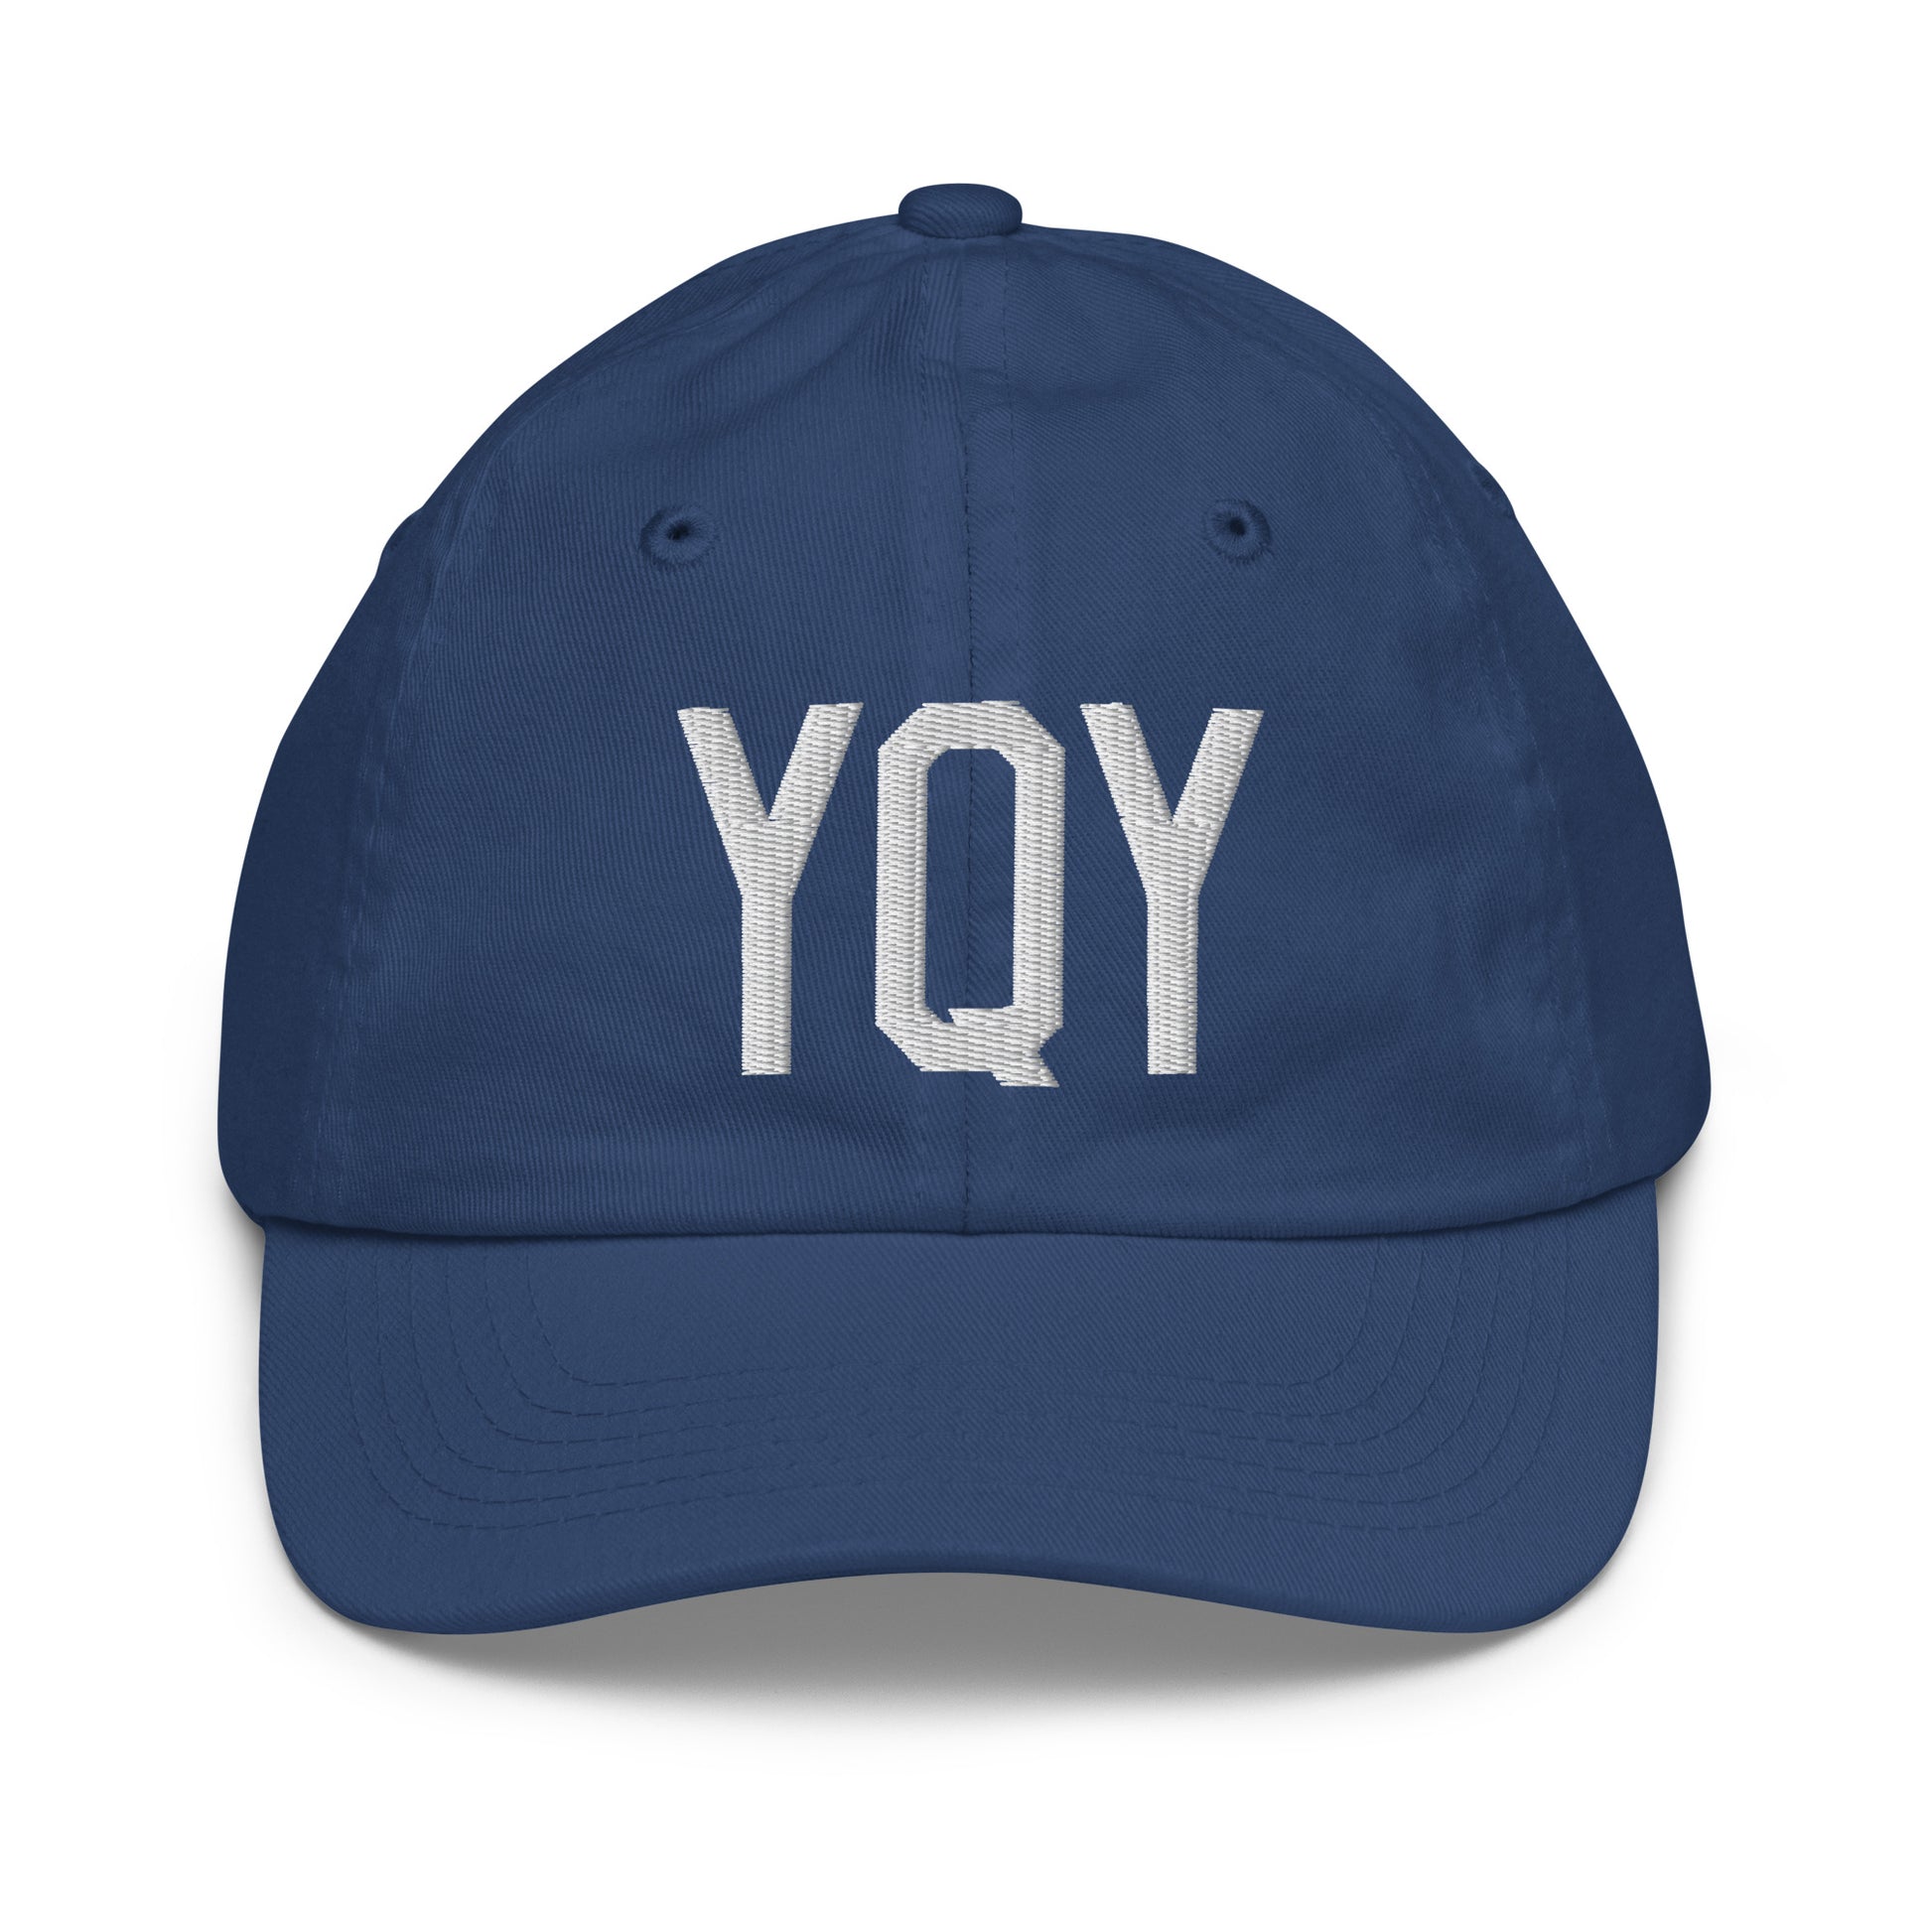 Airport Code Kid's Baseball Cap - White • YQY Sydney • YHM Designs - Image 20